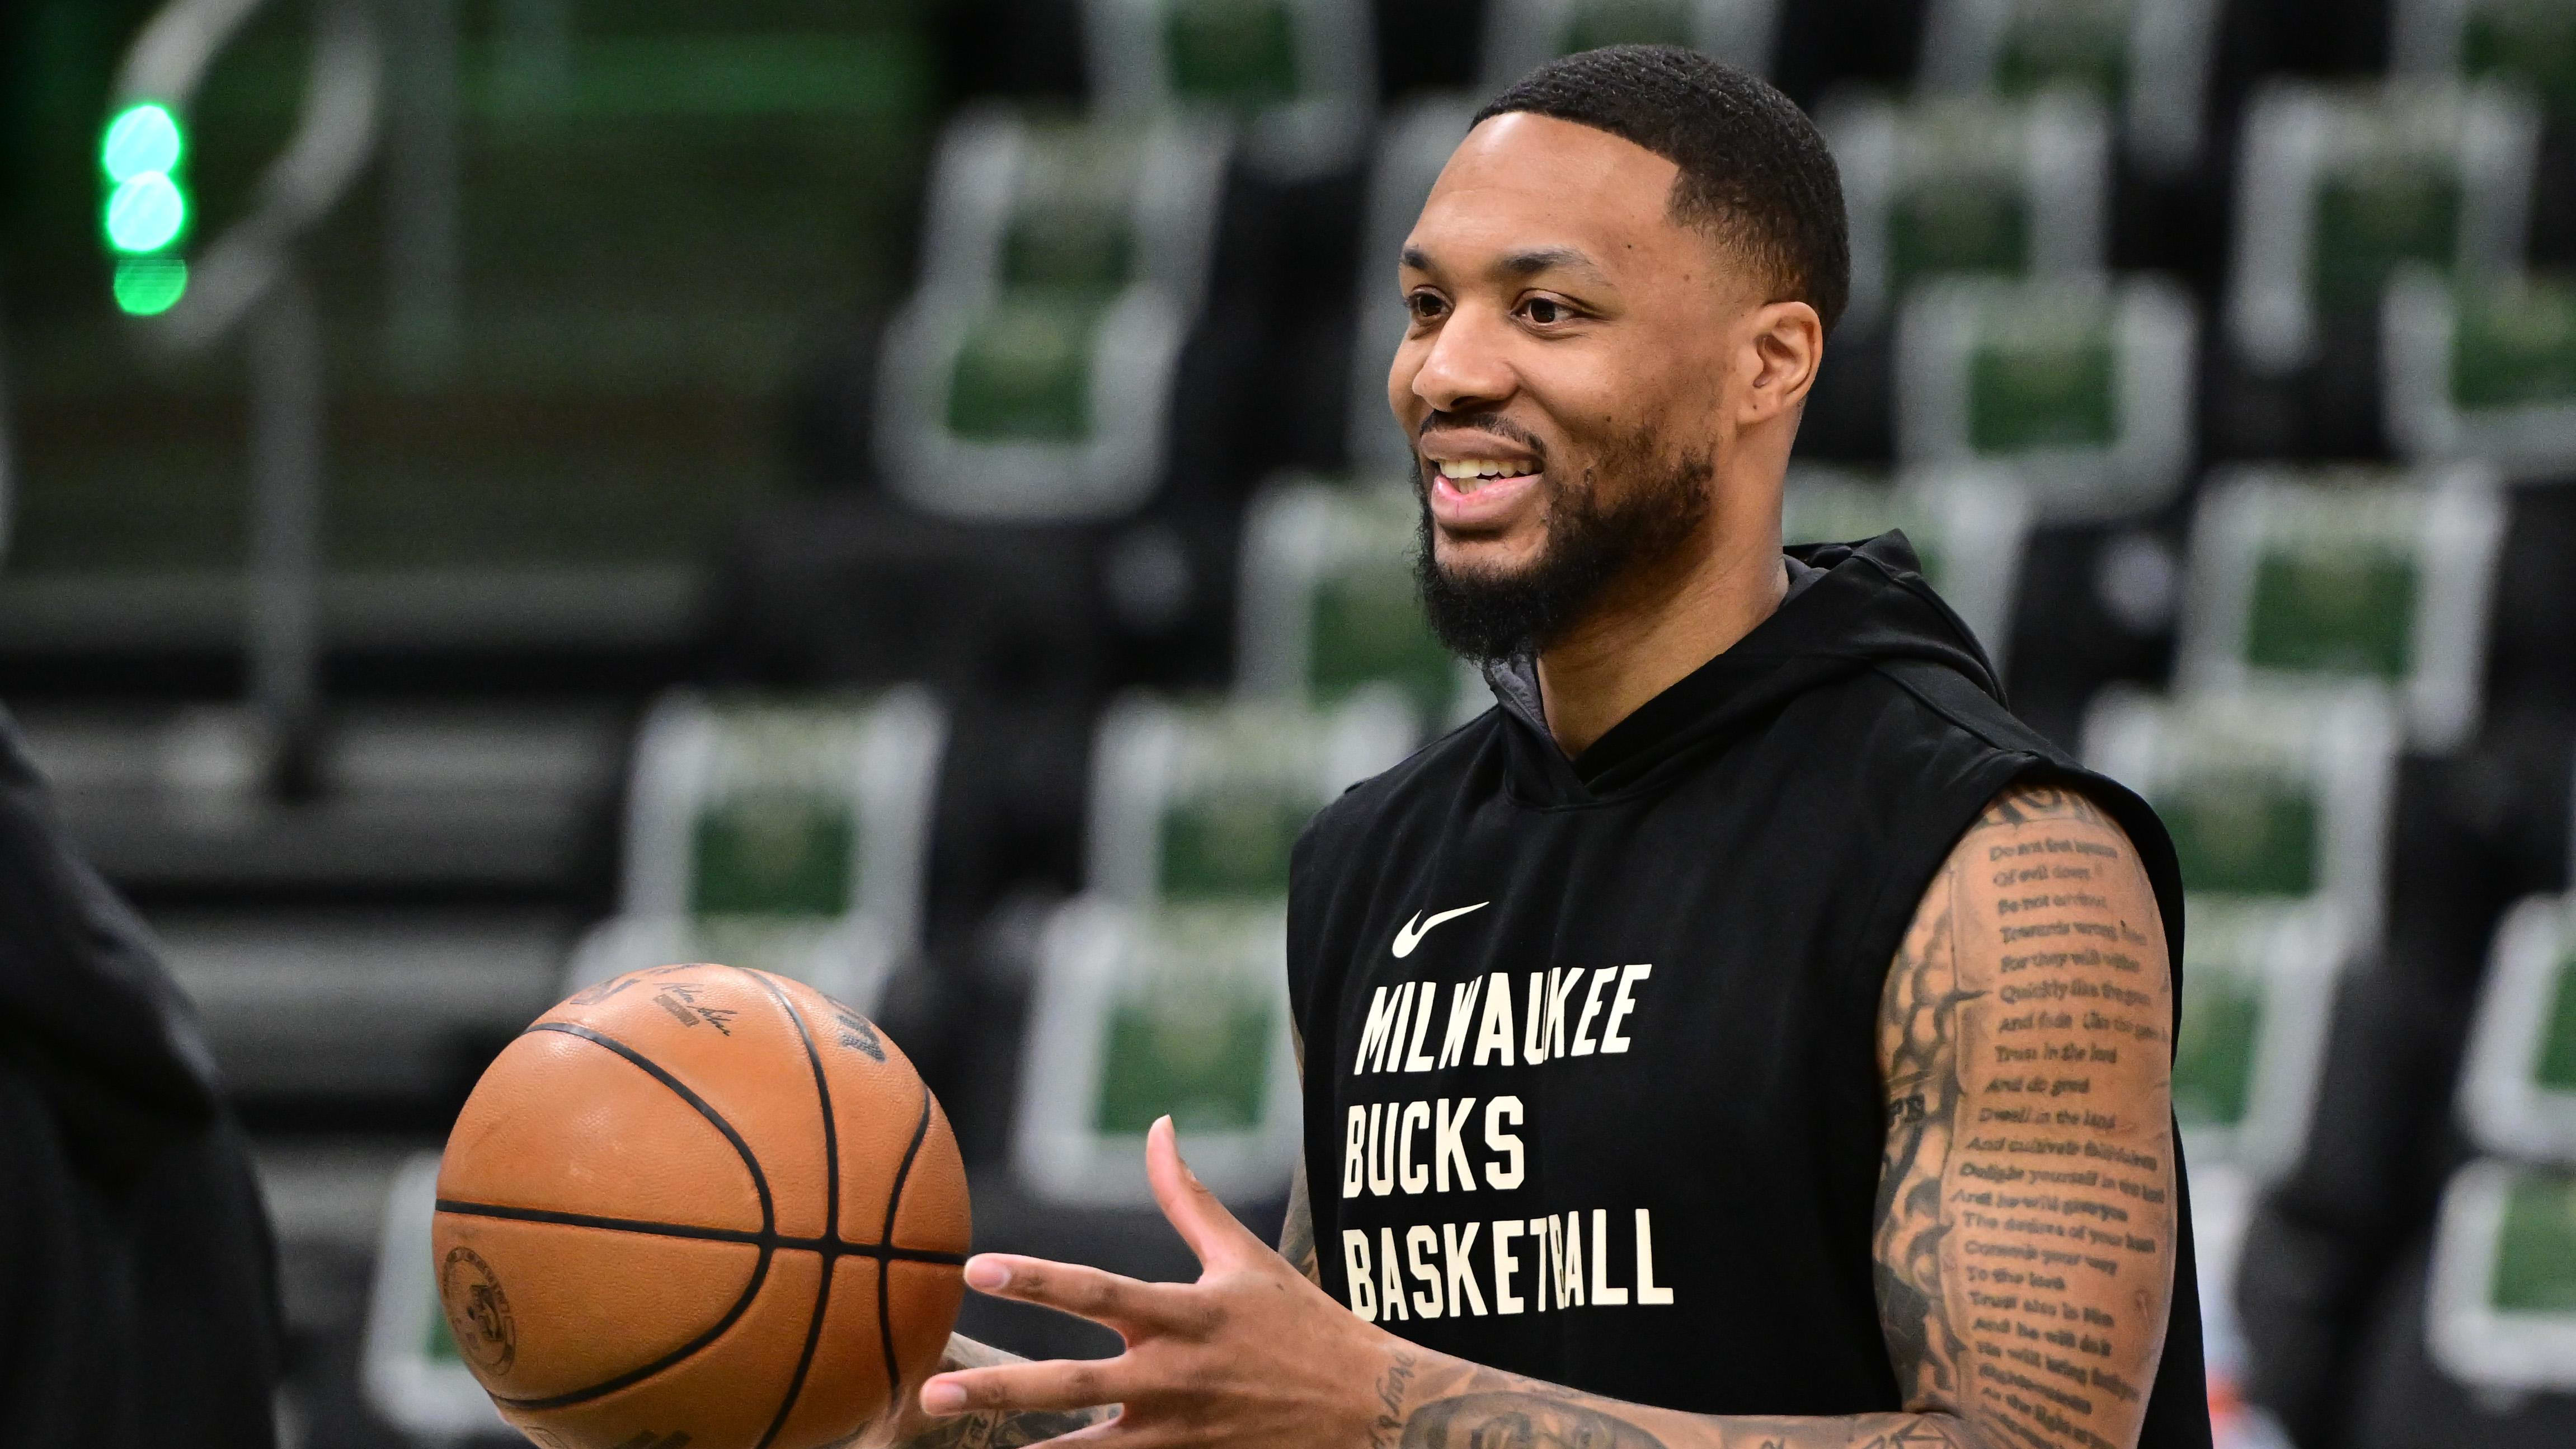 Bucks guard Damian Lillard had a funny quote about being back in the NBA Playoffs. 